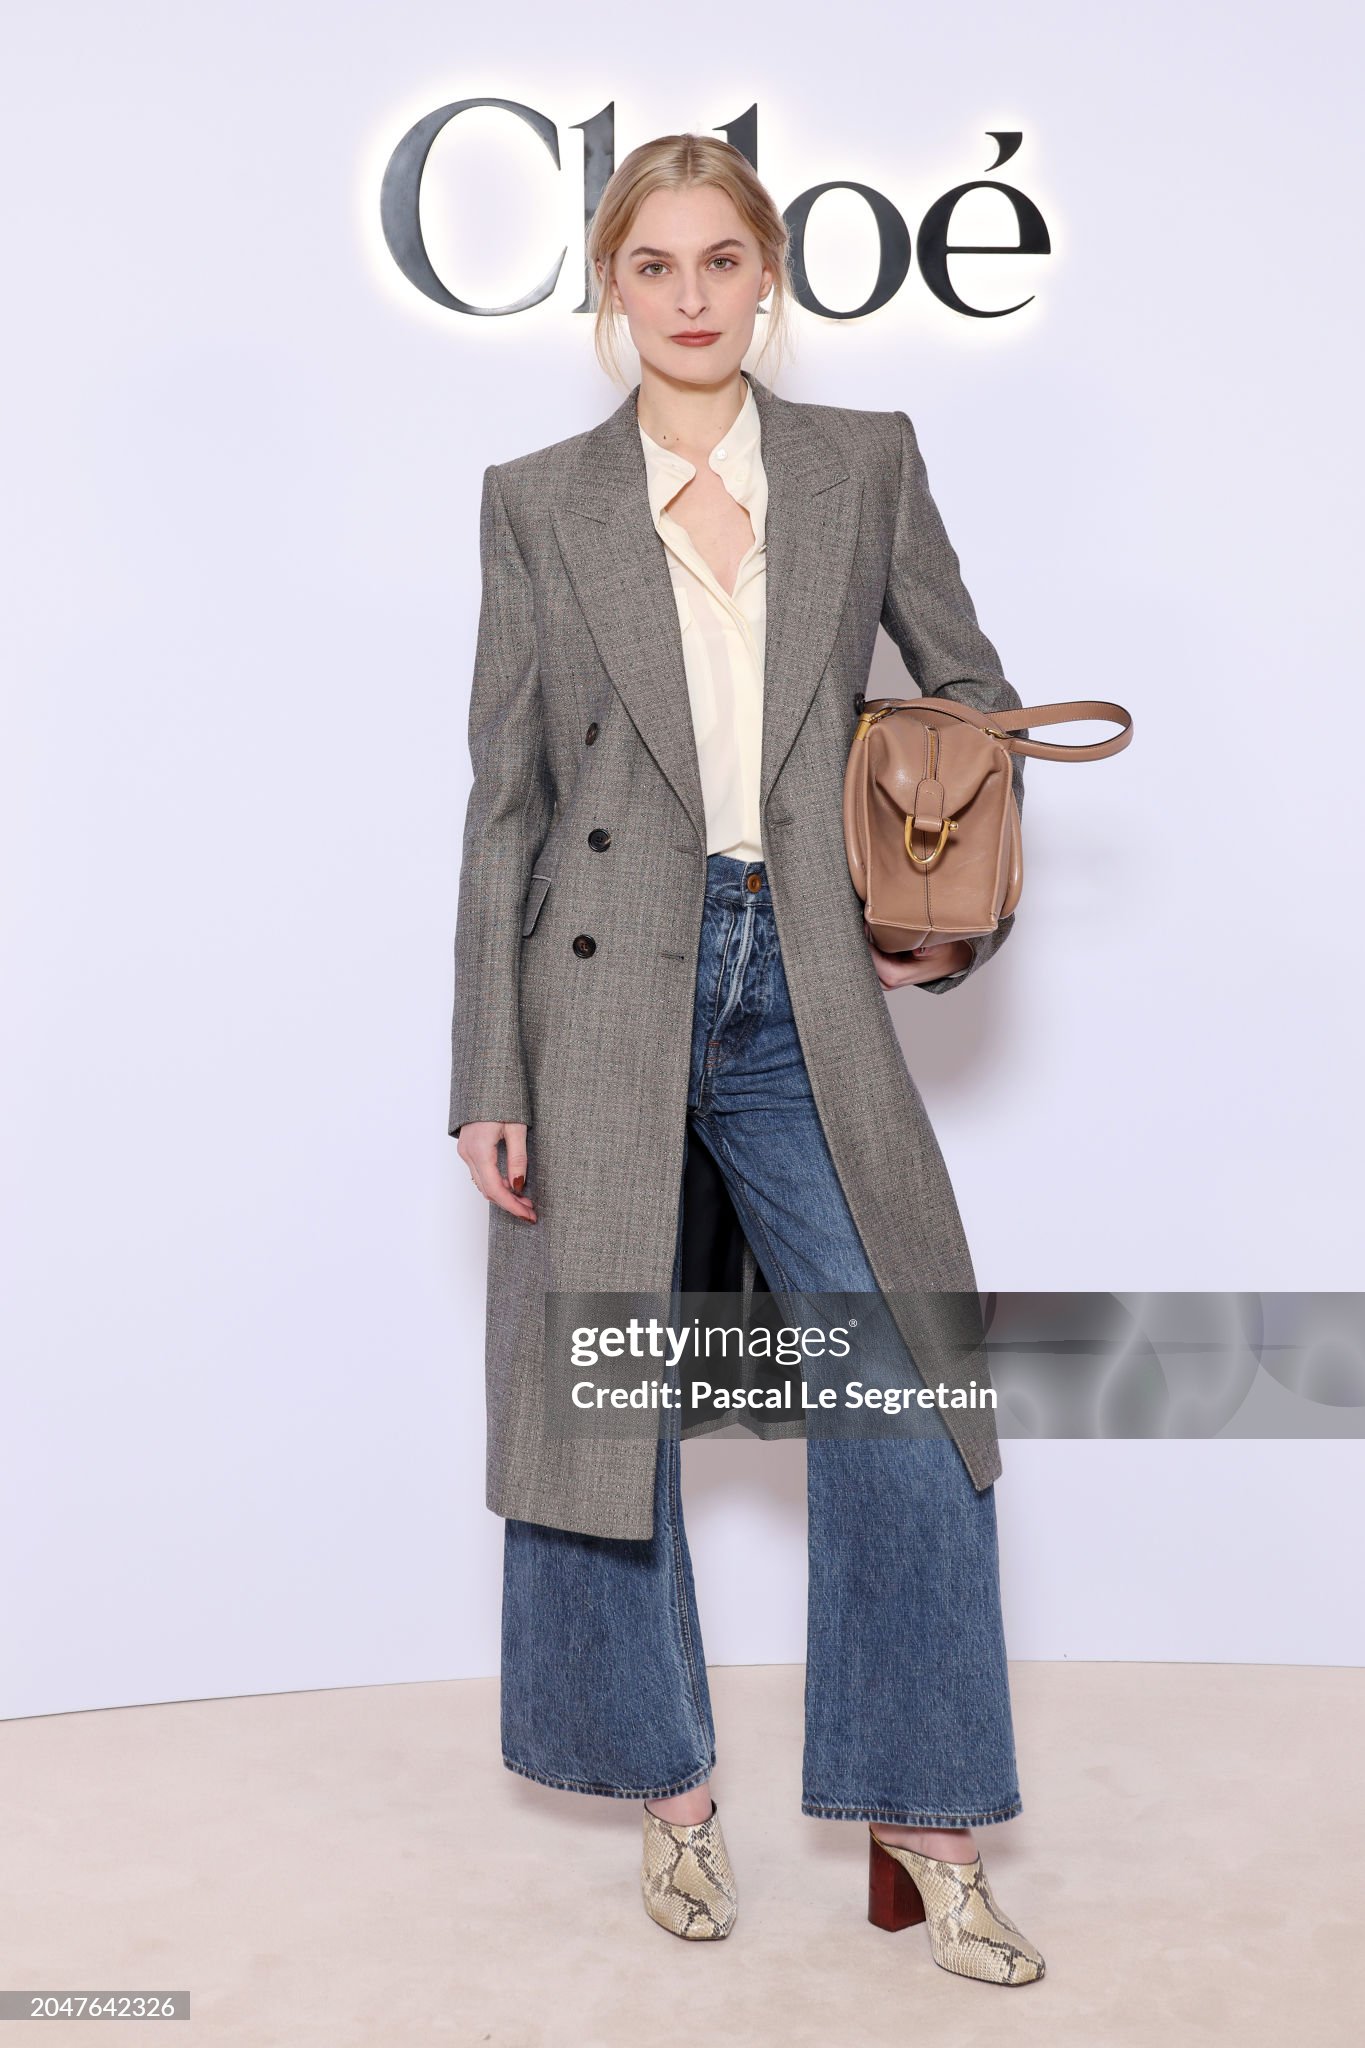 paris-france-christie-tyler-attends-the-chlo%C3%A9-womenswear-fall-winter-2024-2025-show-as-part-of.jpg